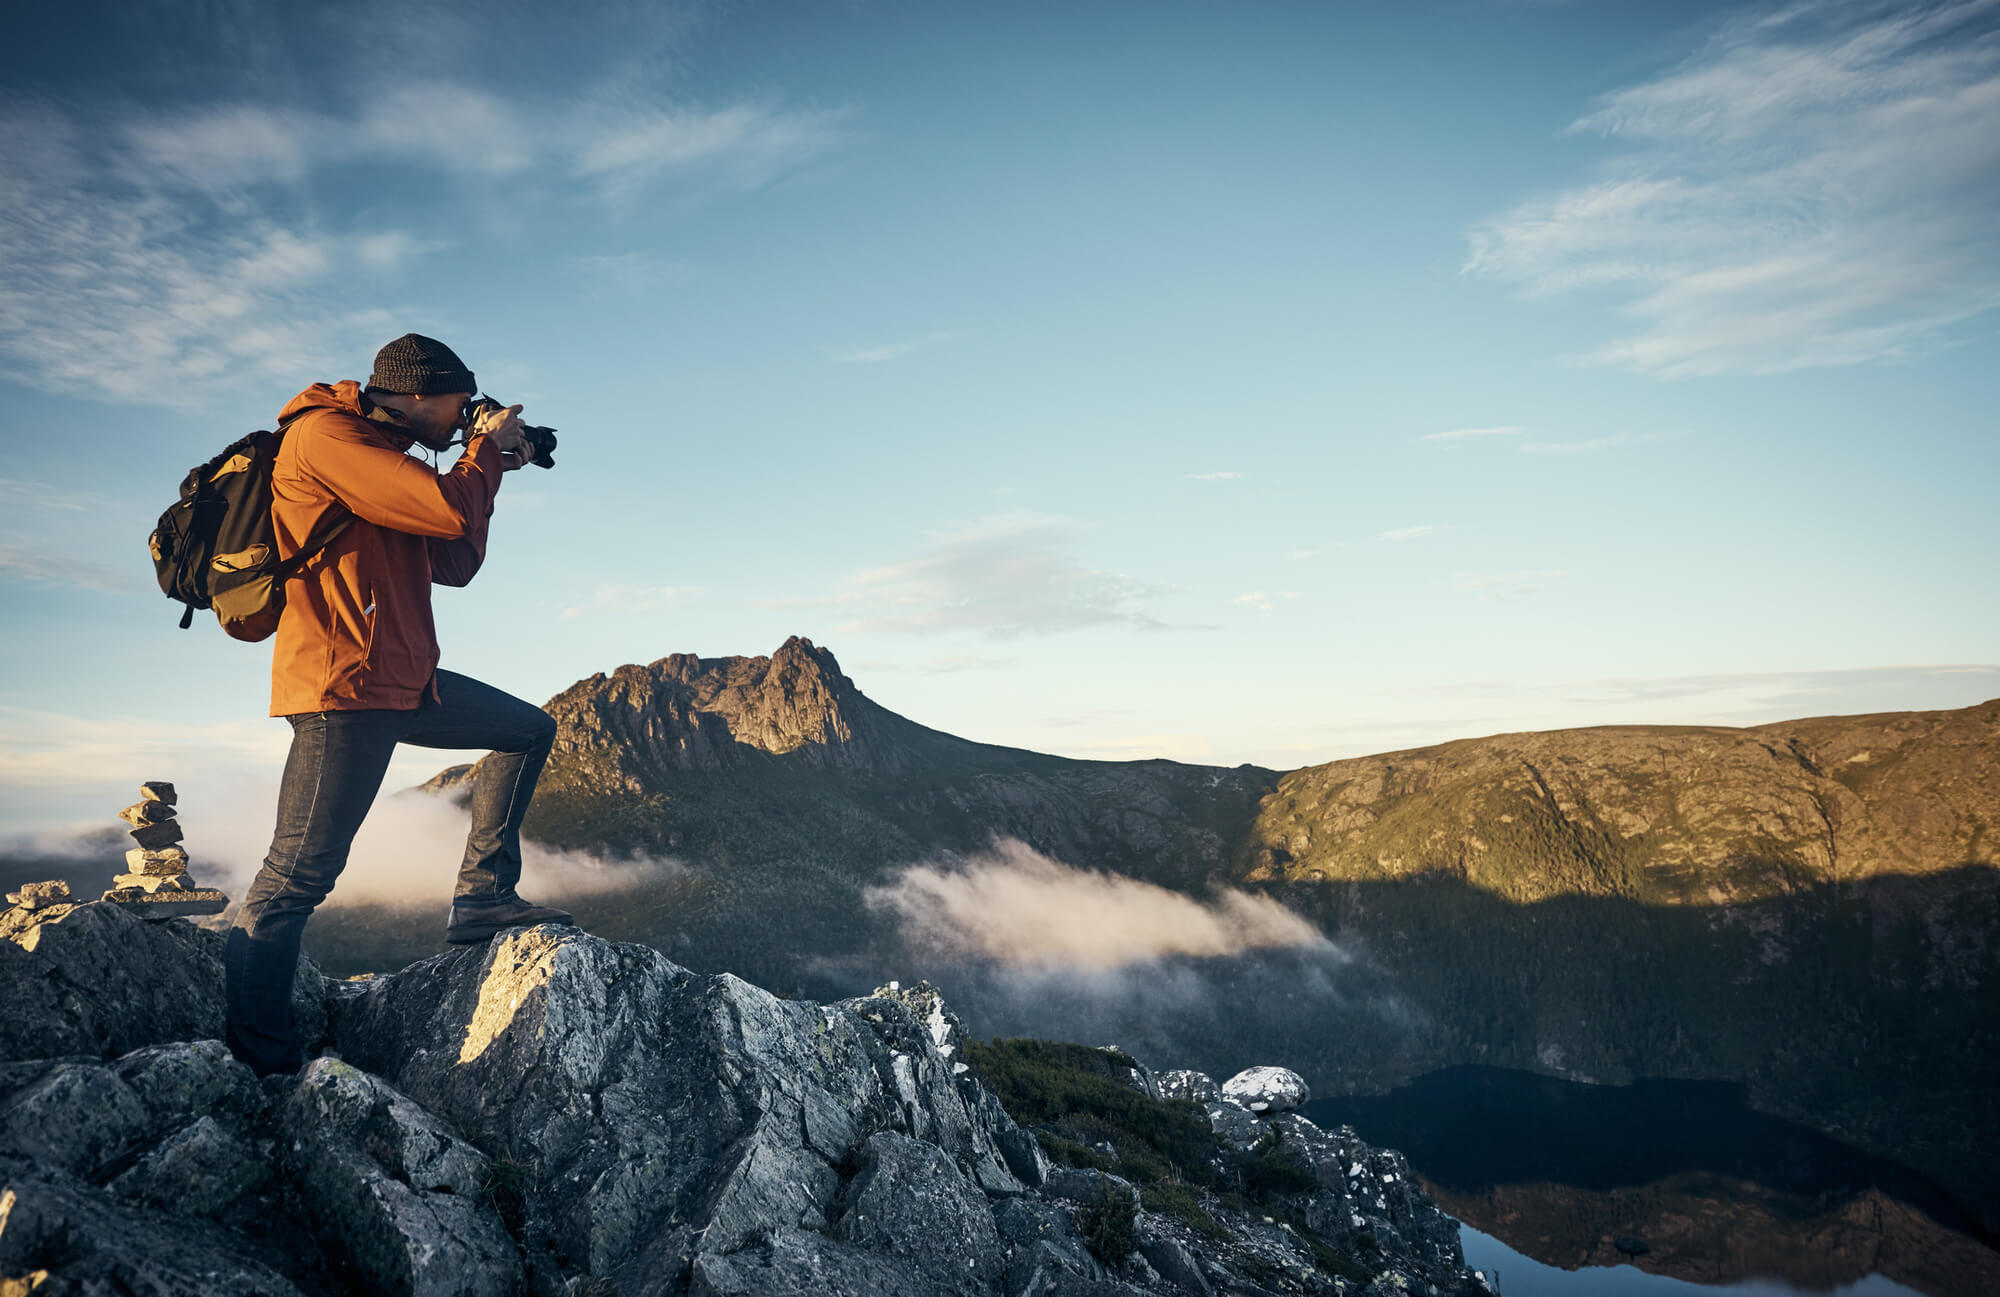 A man standing on top of a mountain taking a photograph